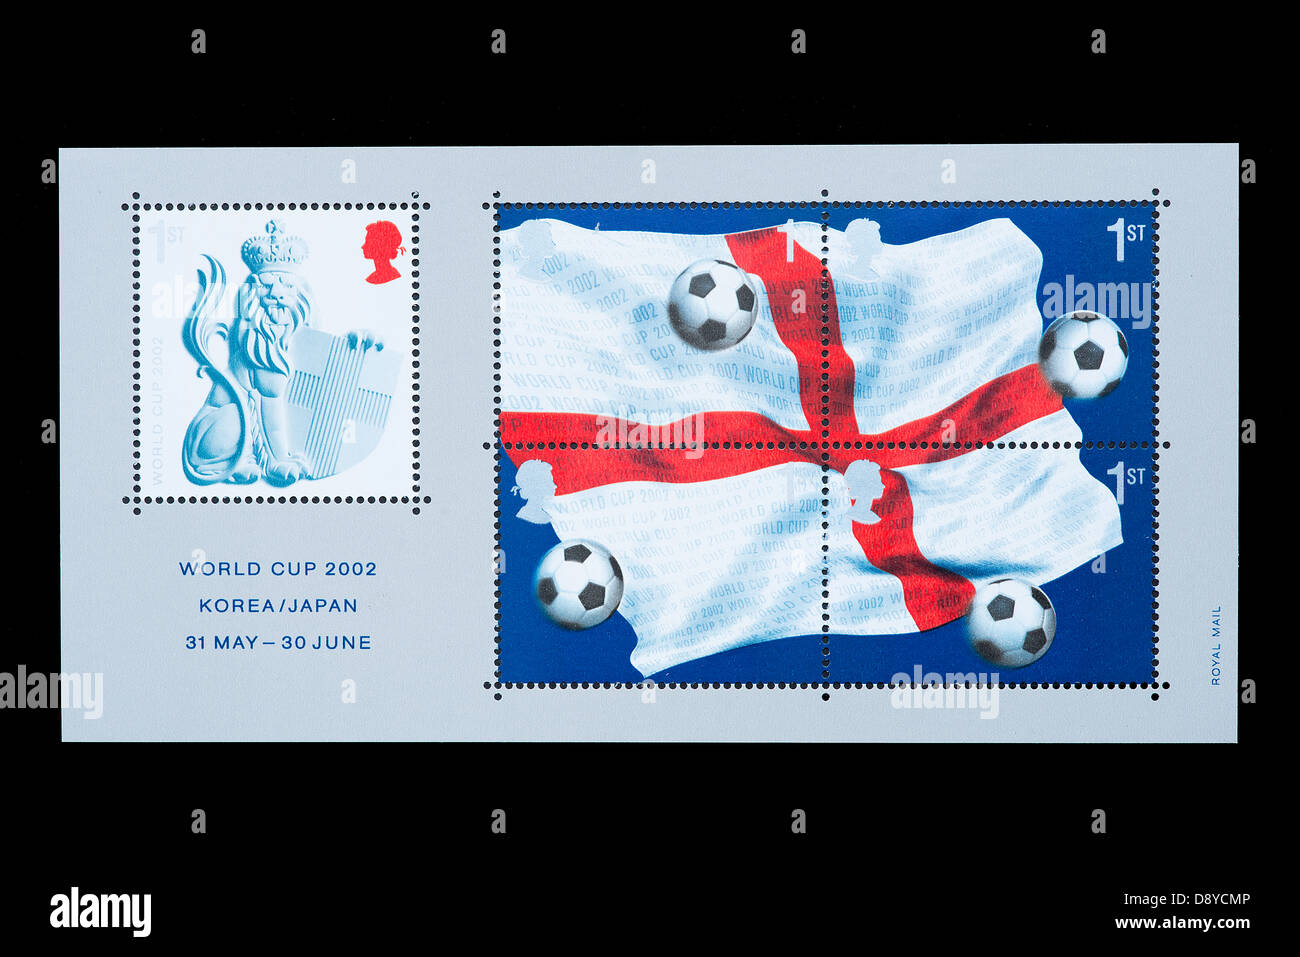 the world cup 2002 in Korea and Japan celebrate  in a british sheet stamp Stock Photo